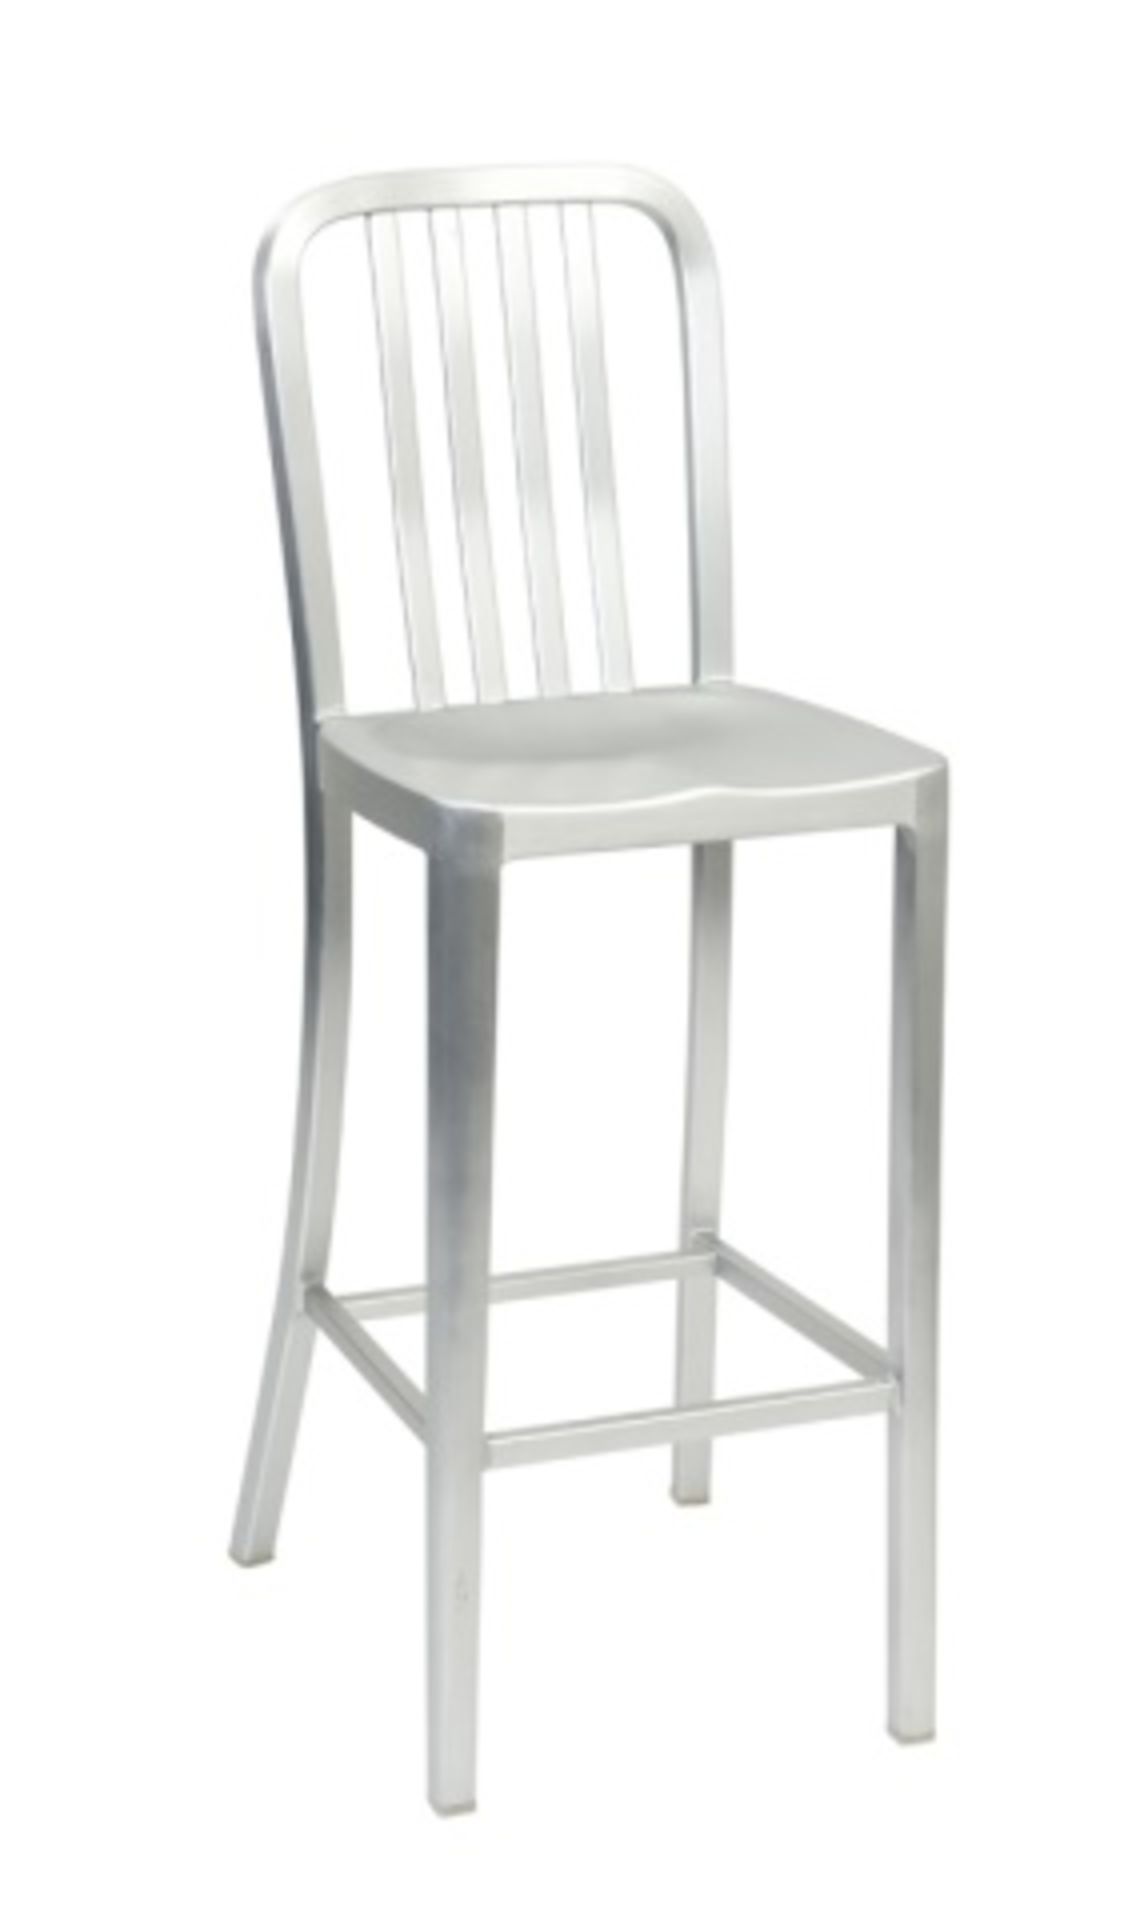 Fleet Barstool - Assorted Silver 1 per box, 4 boxes. 4 total